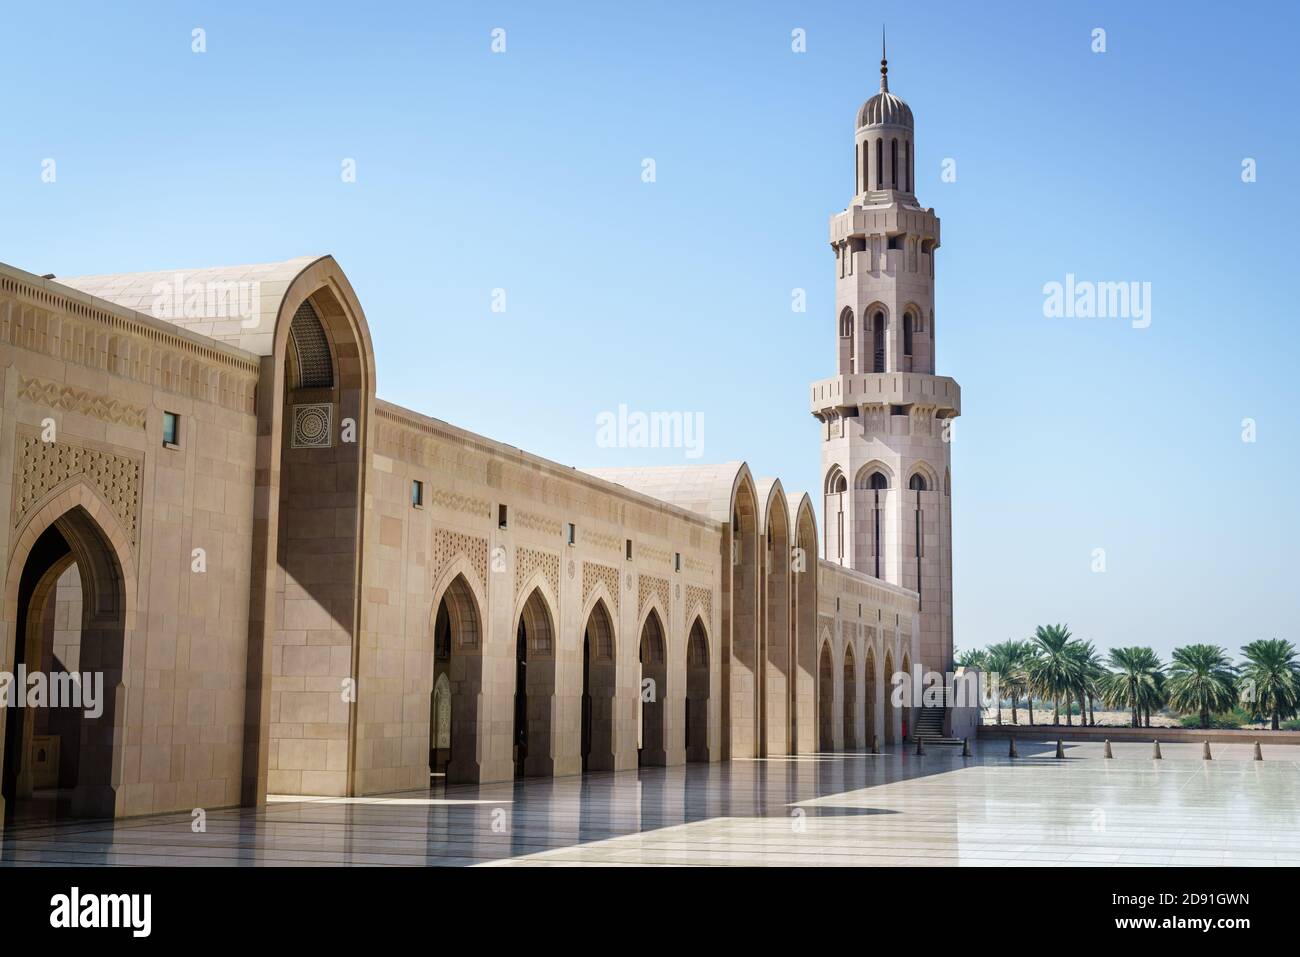 On of the minarets and a gallery at the Sultan Qaboos Grand Mosque in Muscat, Oman Stock Photo